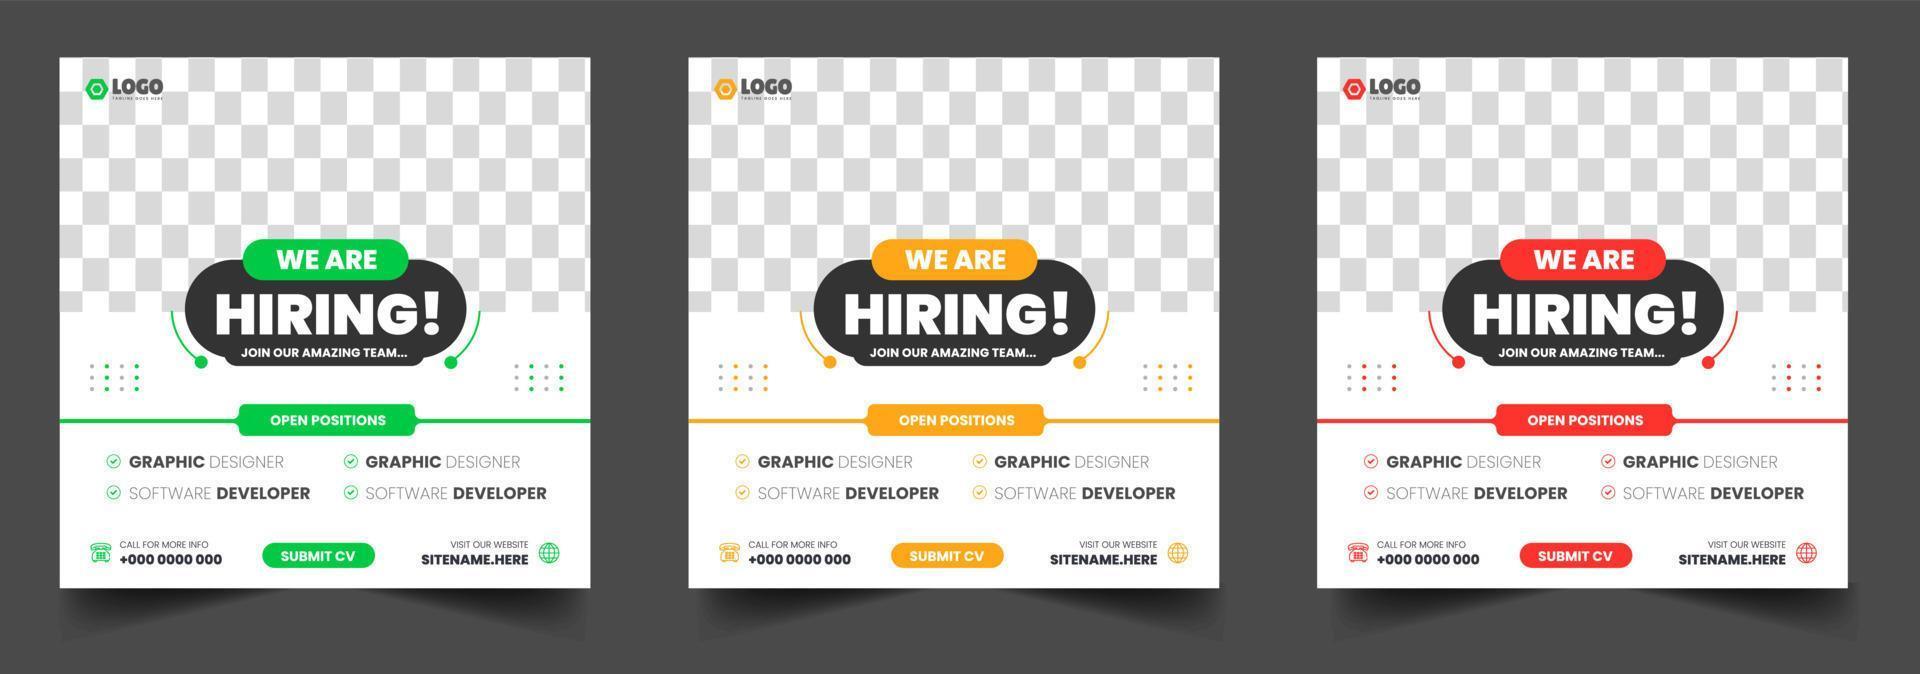 We are hiring job vacancy social media post banner design template with green, red and yellow color. We are hiring job vacancy square web banner design. vector